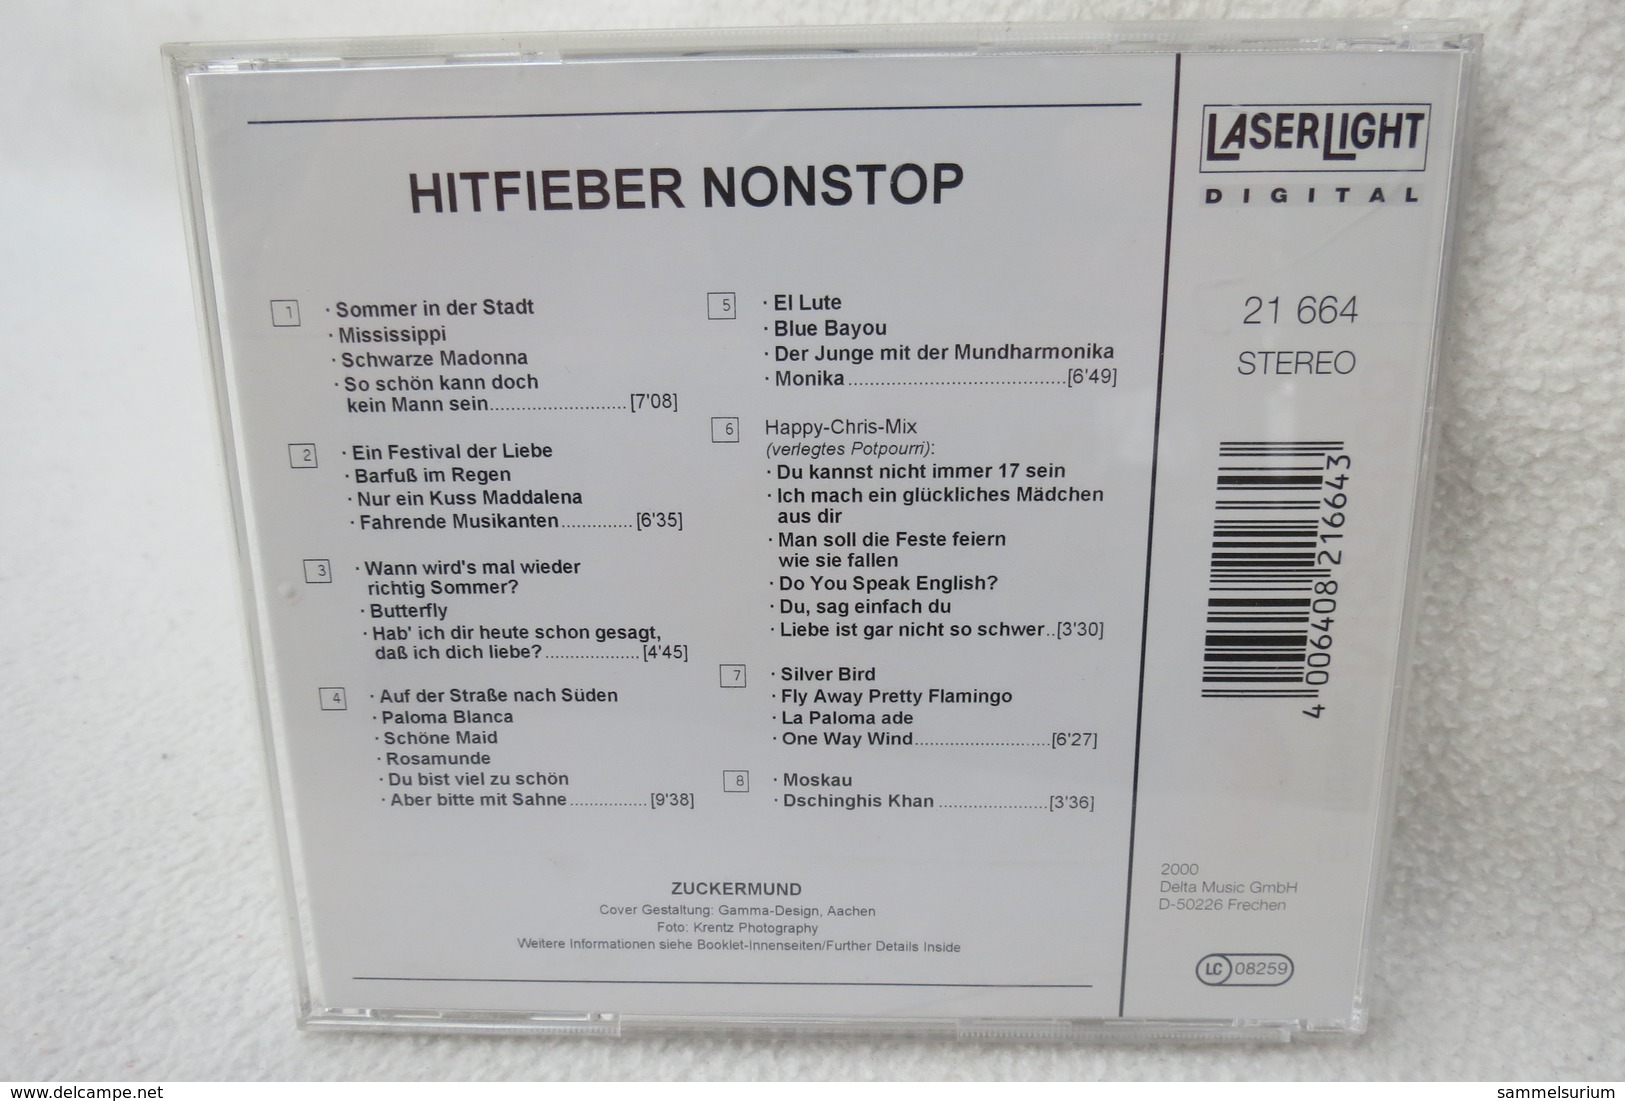 CD "Hitfieber Nonstop" Die Ultimative Partystimmung 1 - Hit-Compilations